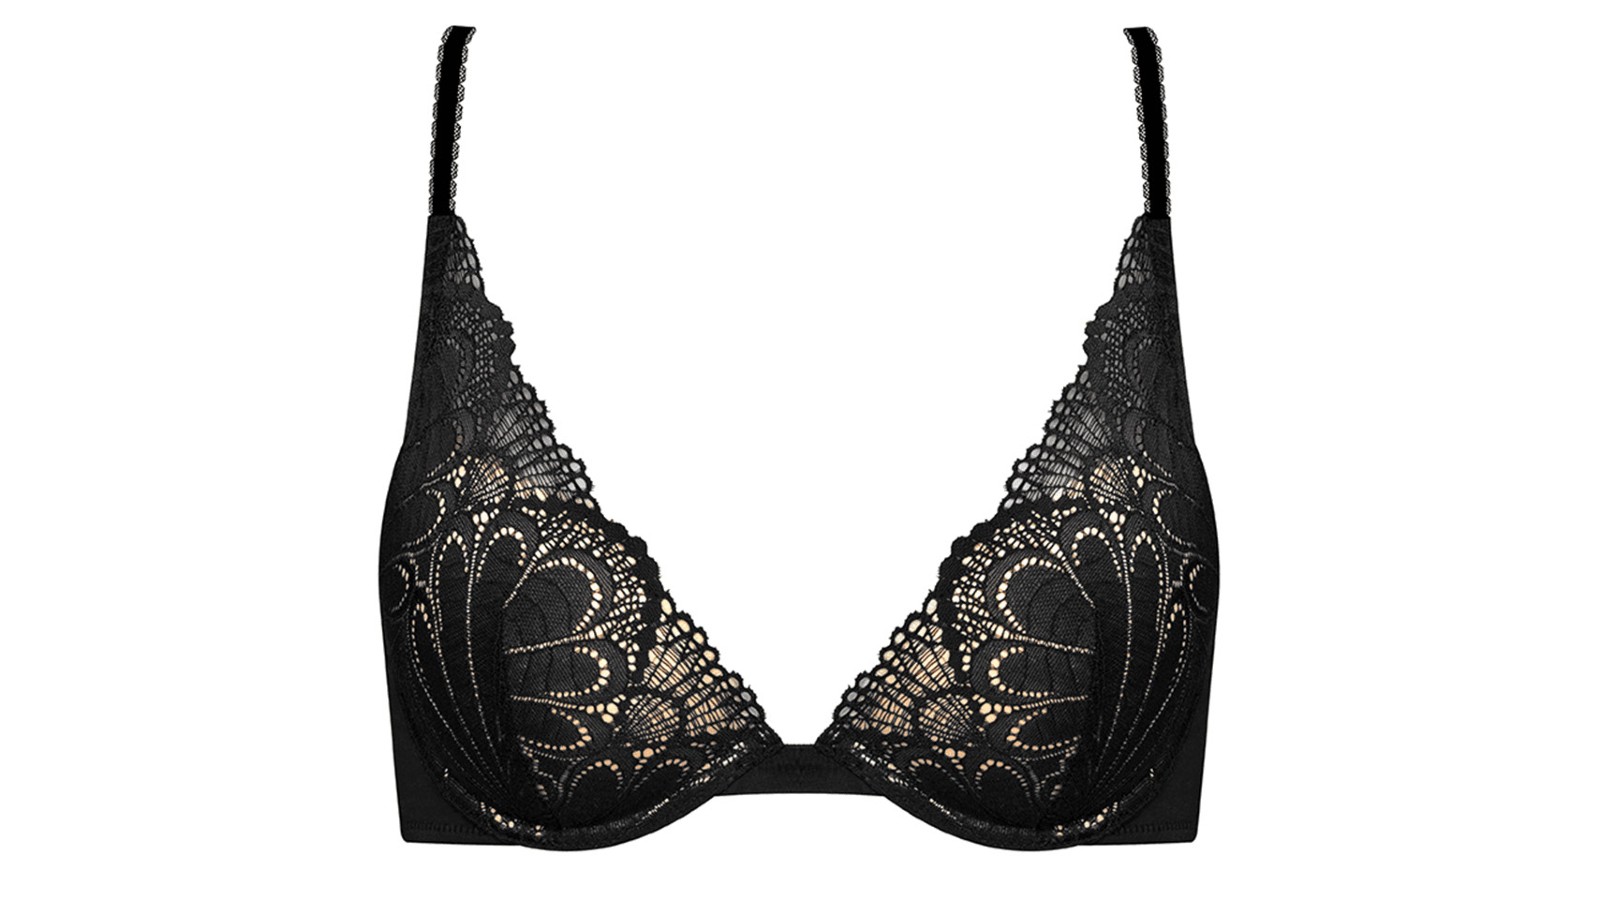 How a bra should fit: Tips and tricks for comfortable, niggle-free wear ...